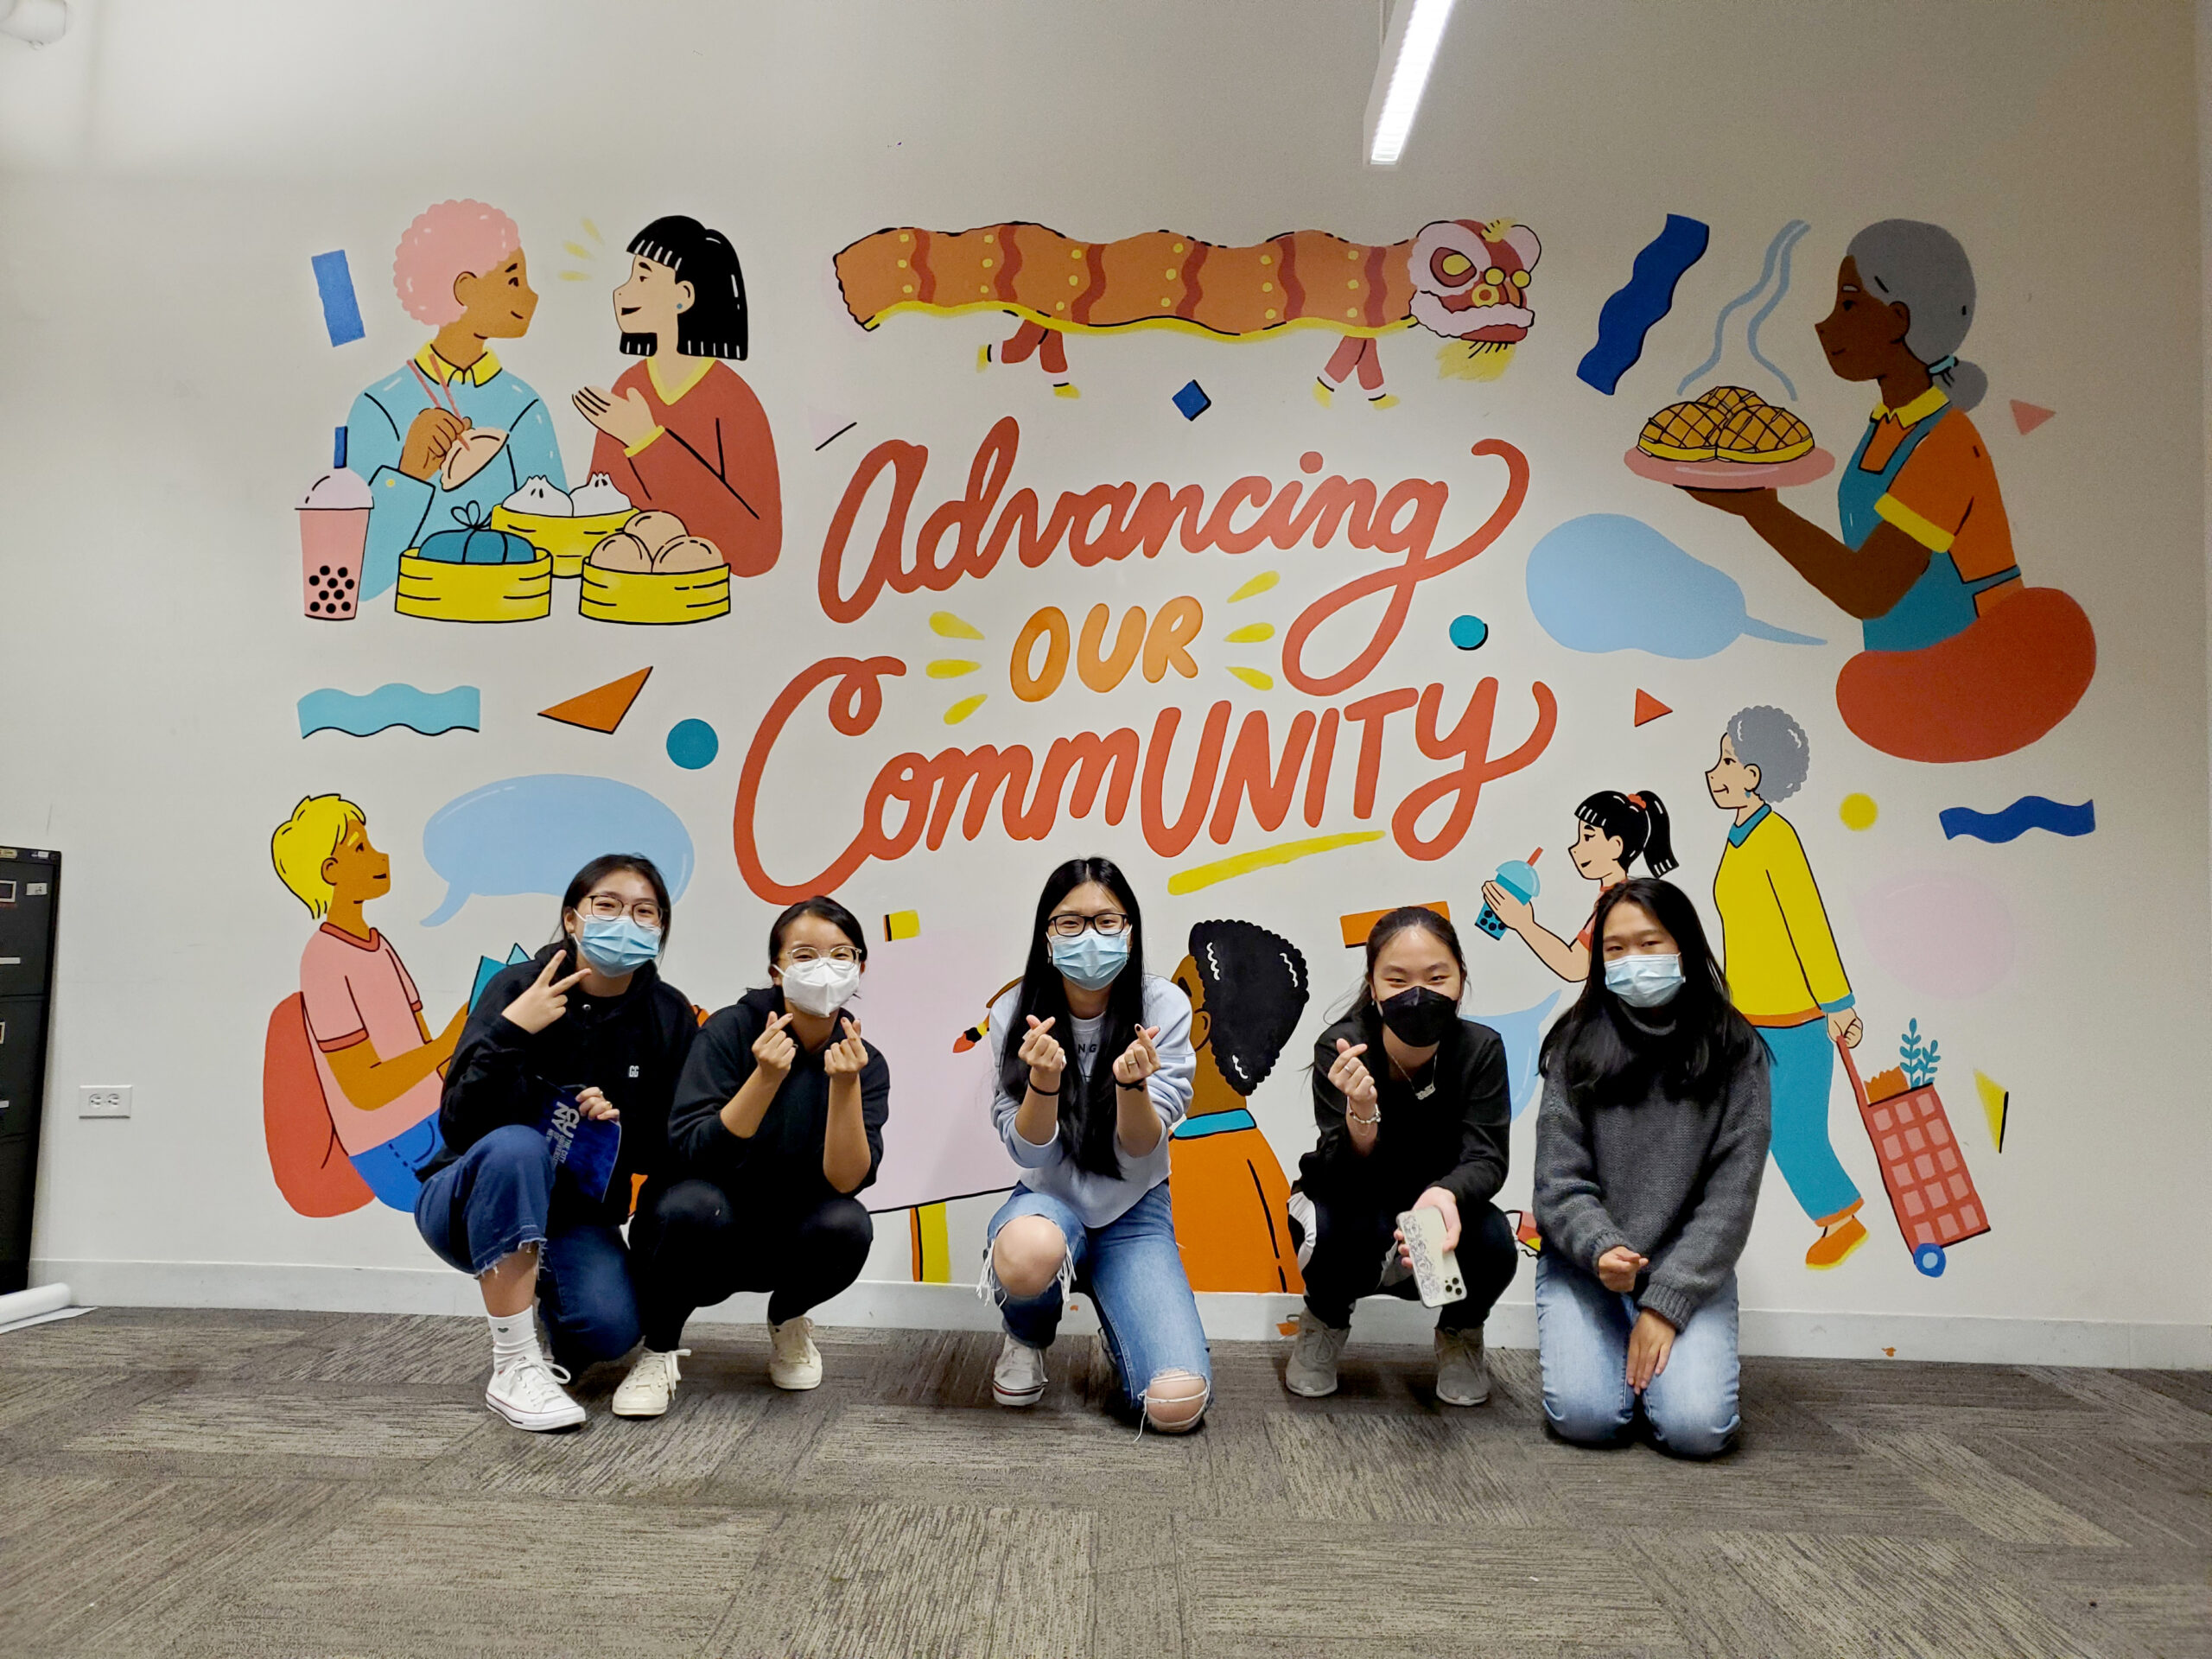 Students kneel in front of colorful mural that says Advancing our Community